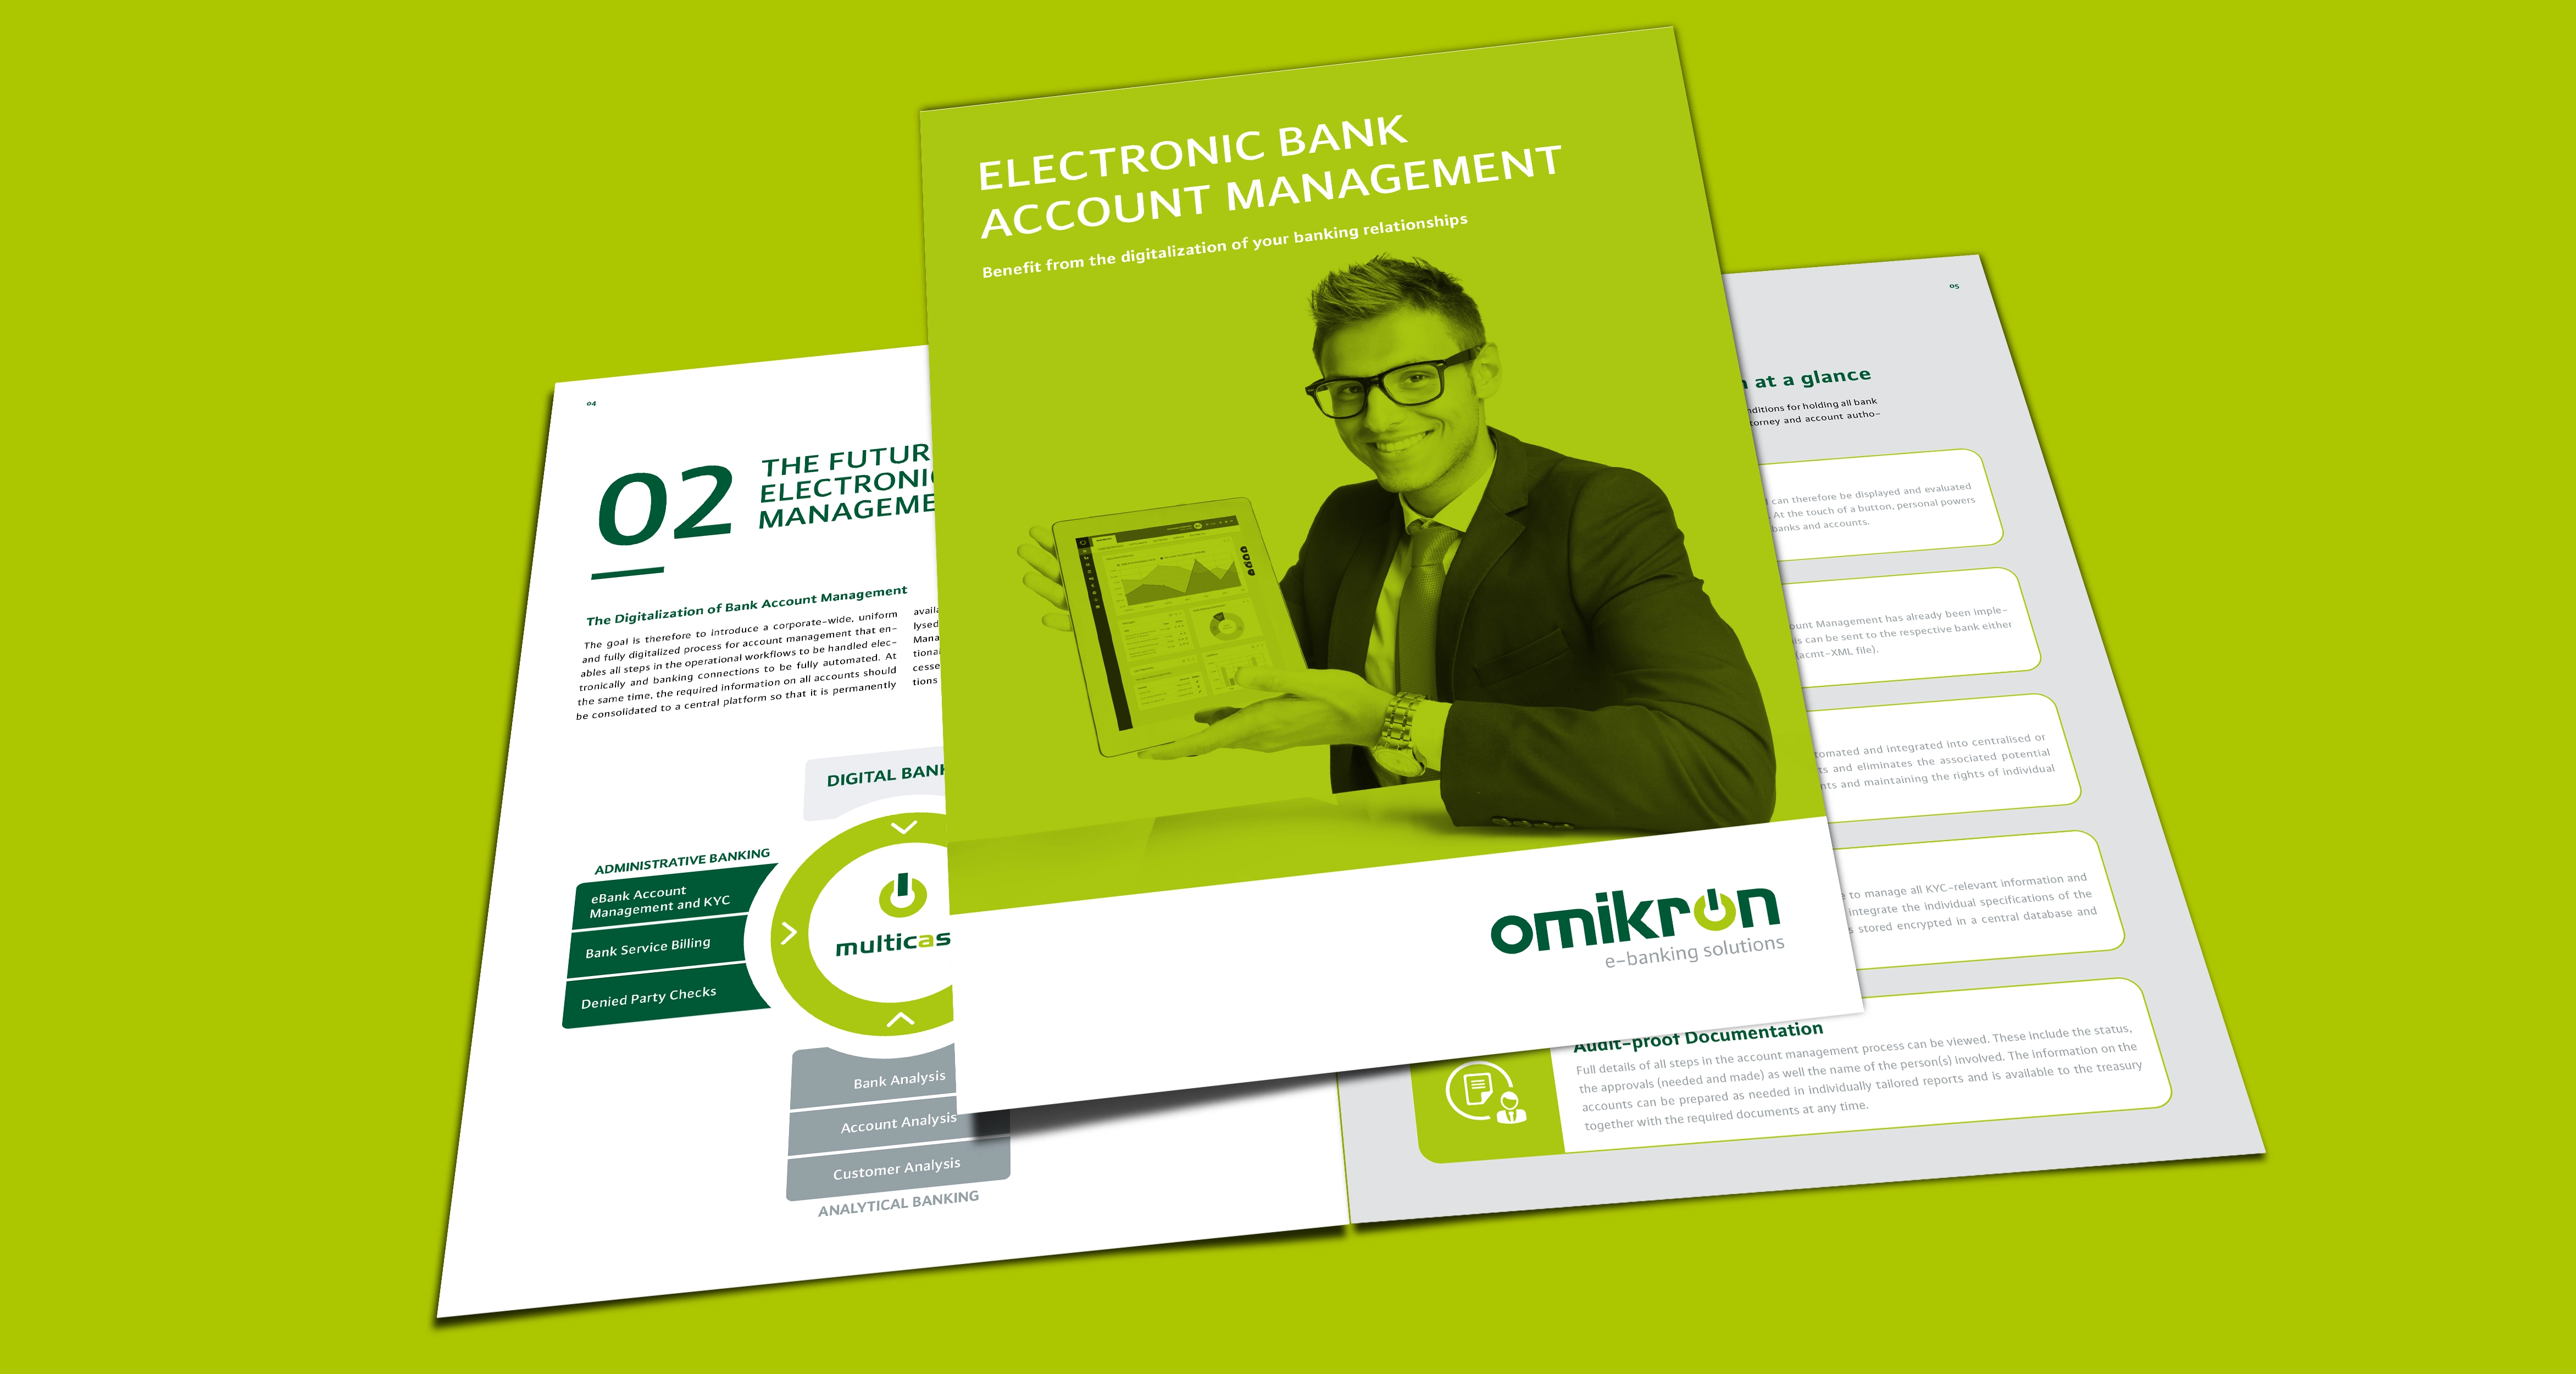 In our Electronic Bank Account Management product brochure, you will find detailed background information on the digitalization of your banking relationships and our solution for a fully digital account lifecycle management.